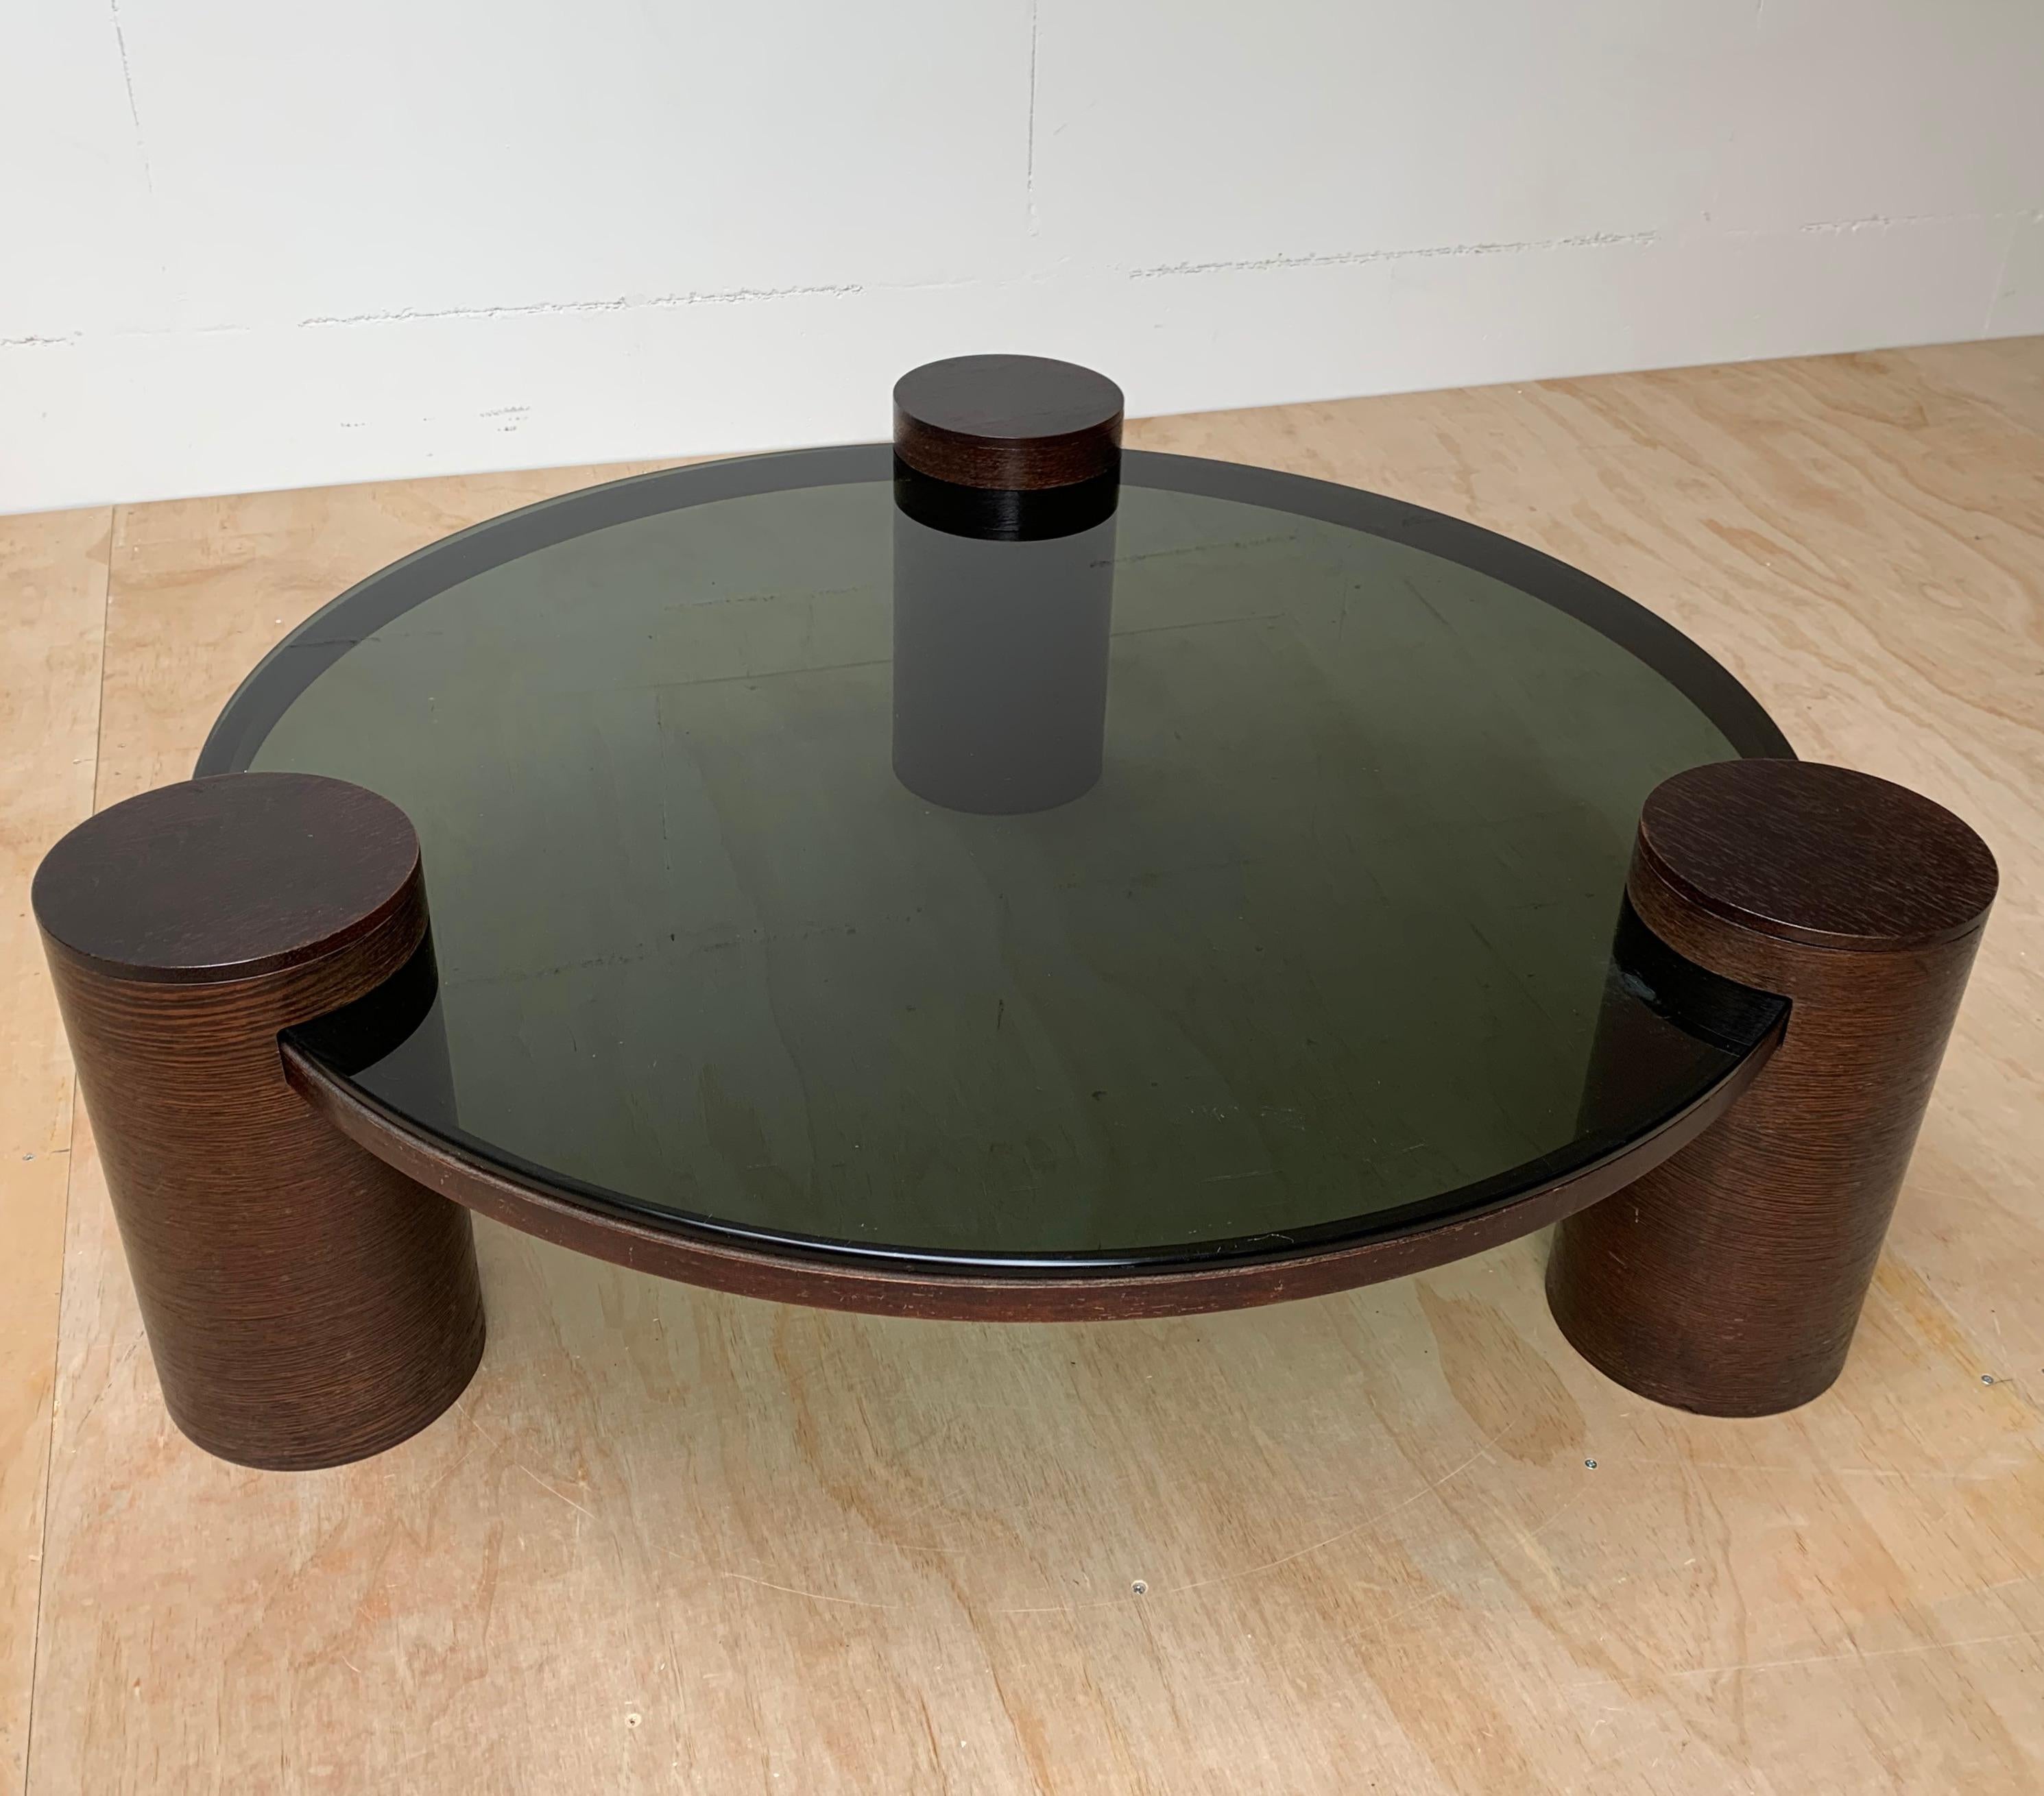 Unique Midcentury Modern Smoked Green Glass Coffee Table w Three Wooden Columns For Sale 6